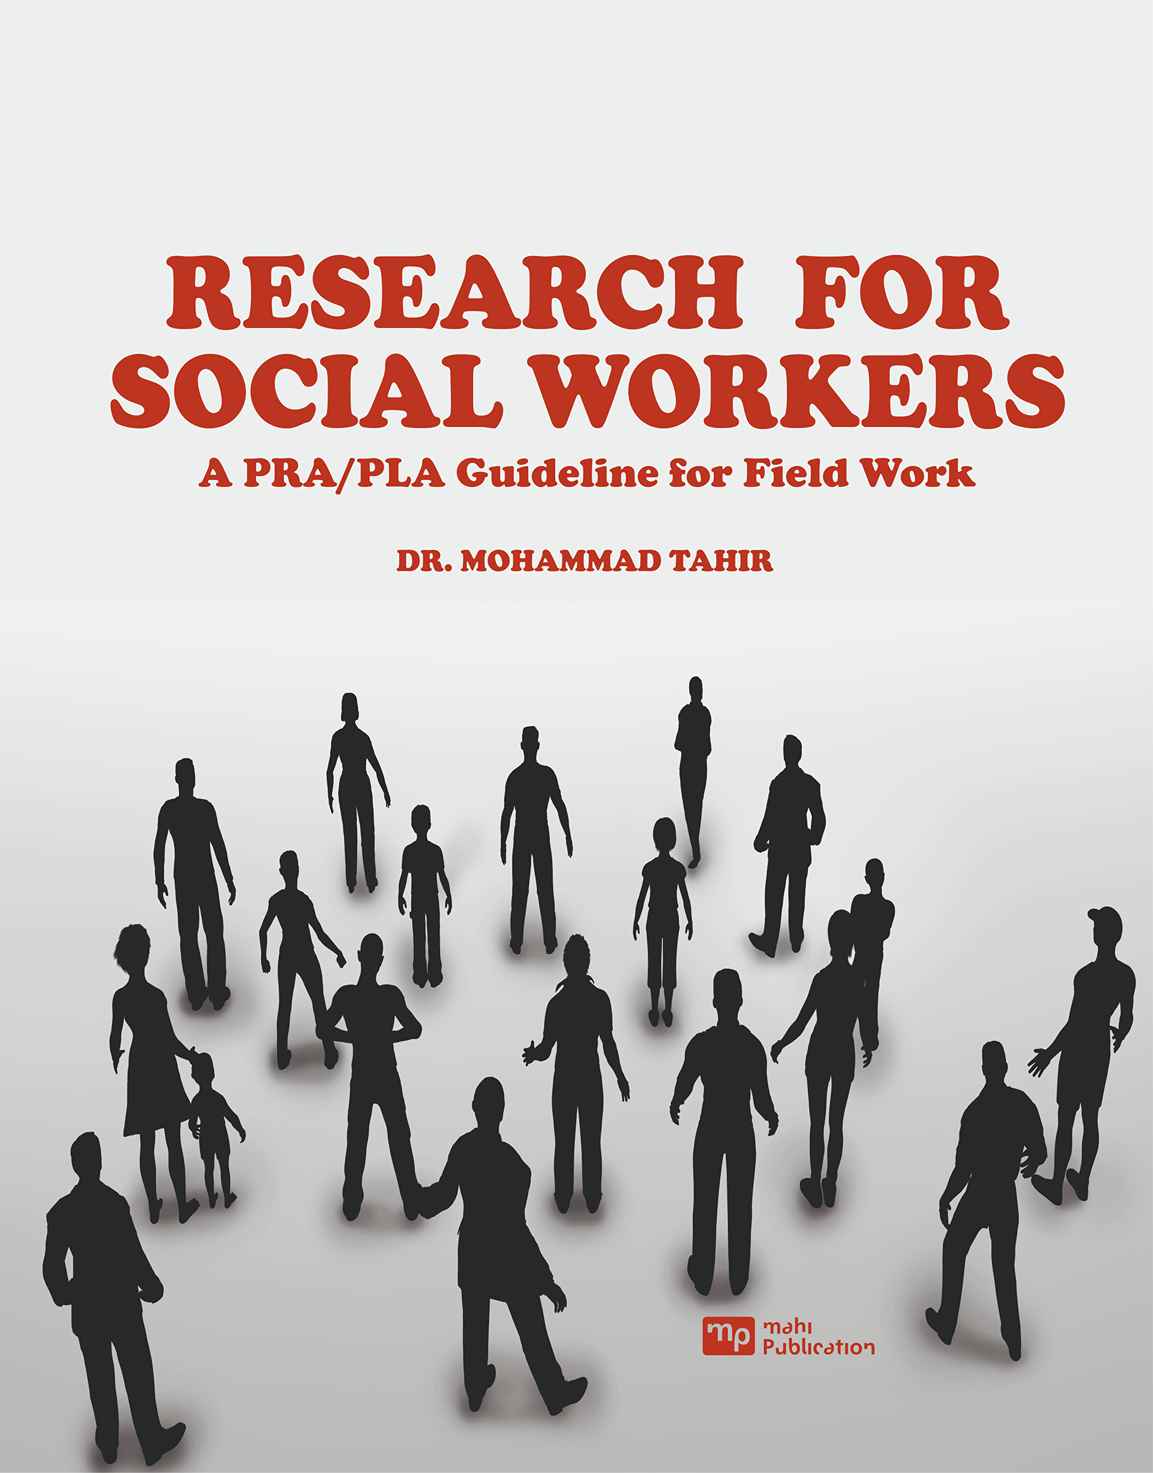 Research for Social Workers A PRA/PLA Guideline for Field Work Dr.  Mohammad Tahir 9789394238916 978-93-942389-1-6 Mahi Publication